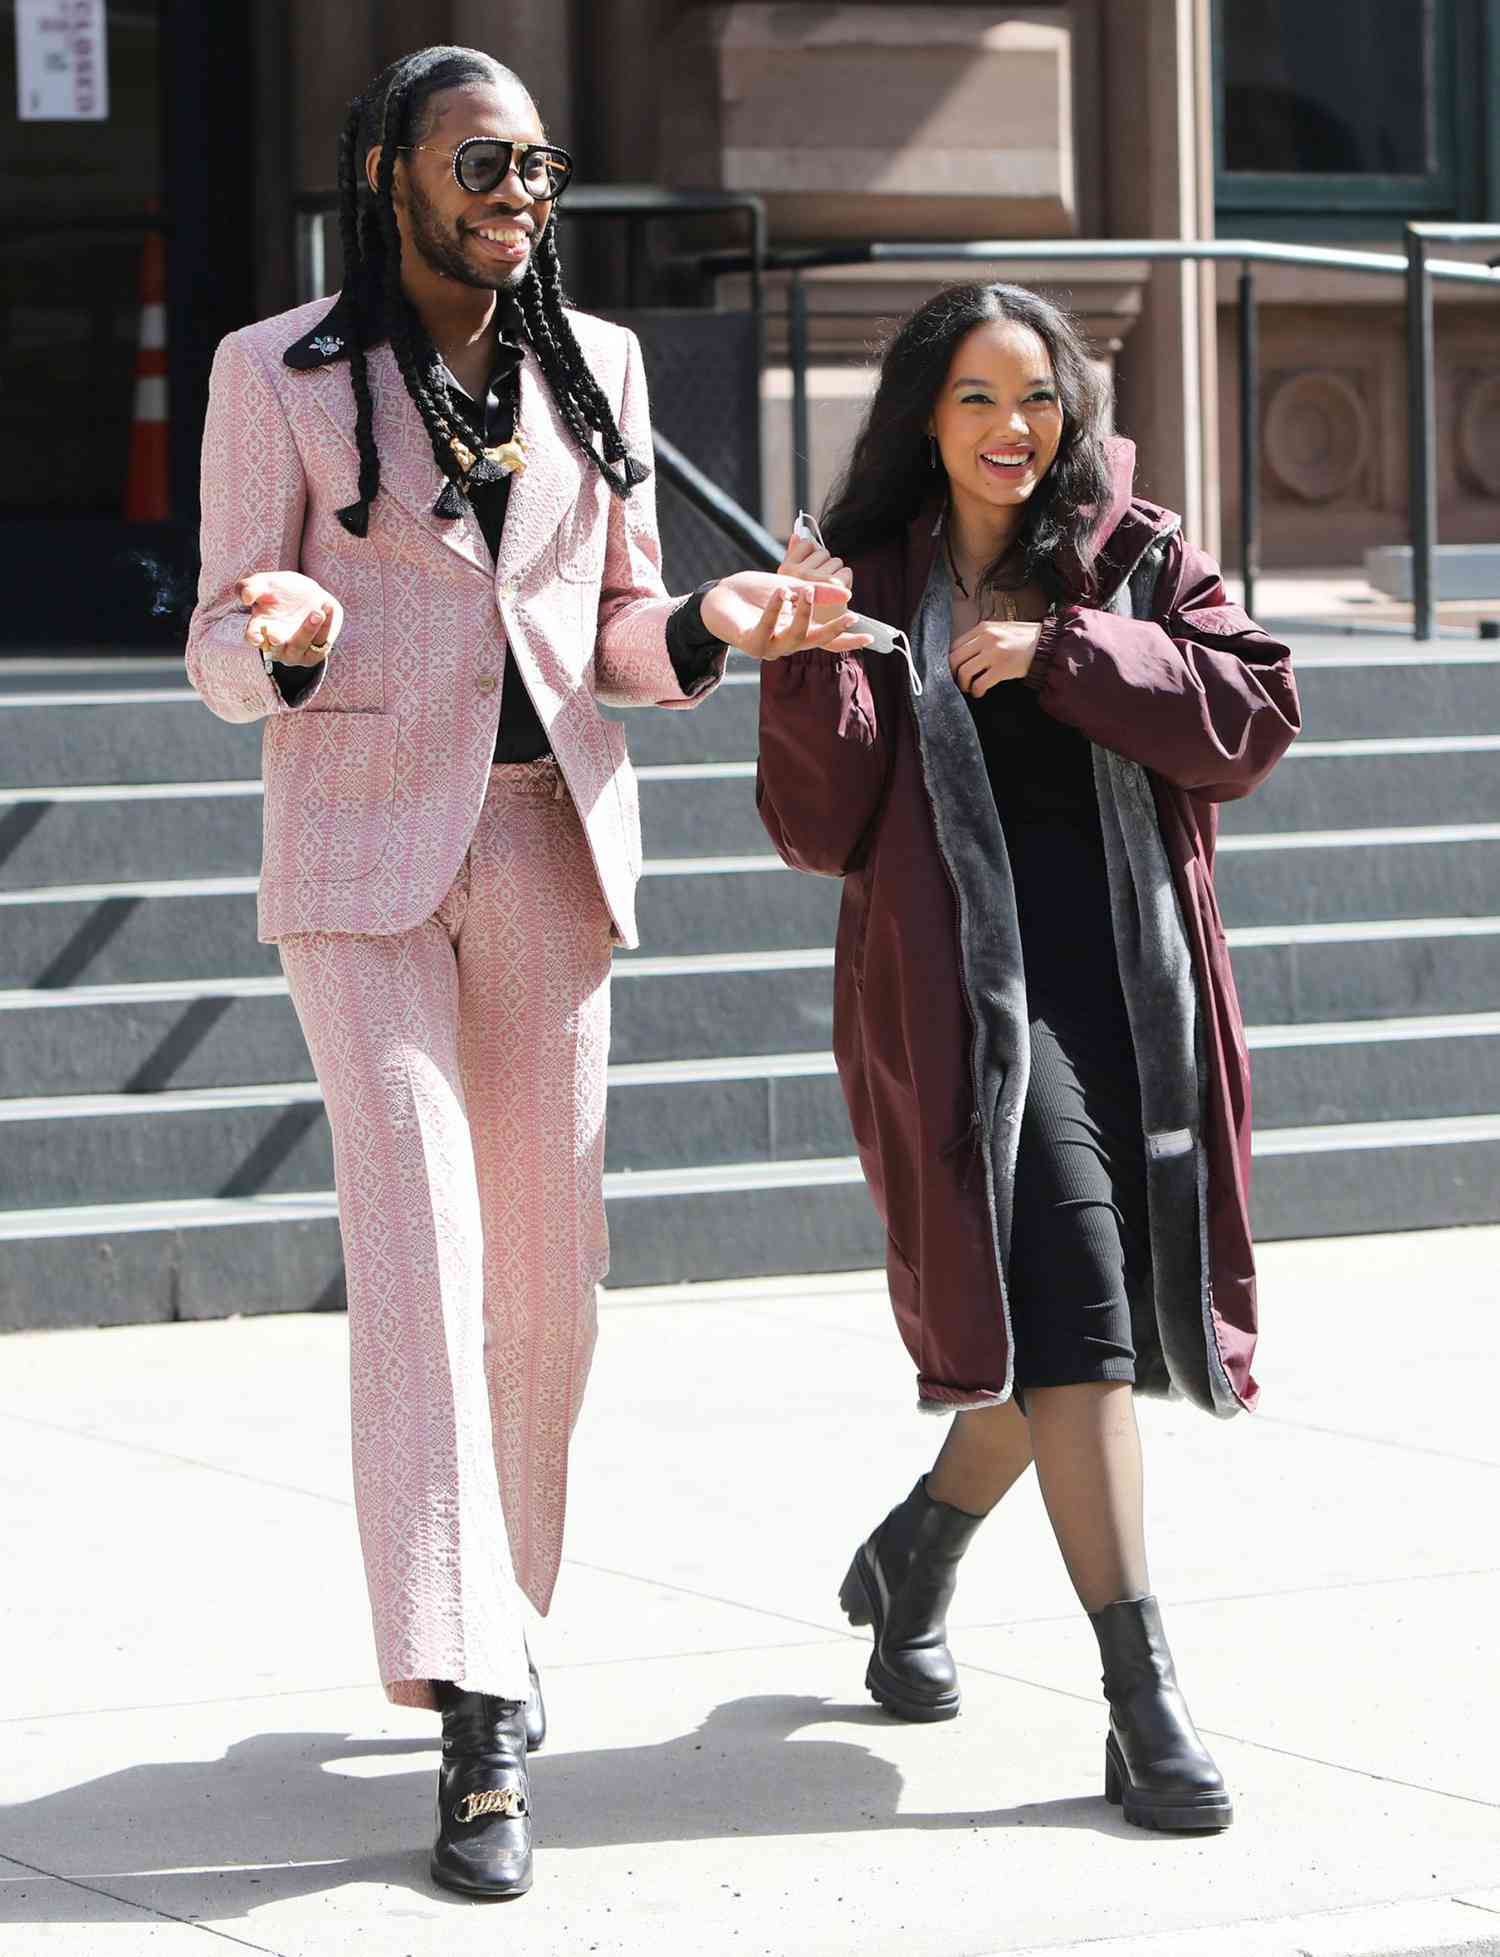 Jeremy O. Harris and Whitney Peak are seen on the set of "Gossip Girl" on March 23, 2021 in New York City